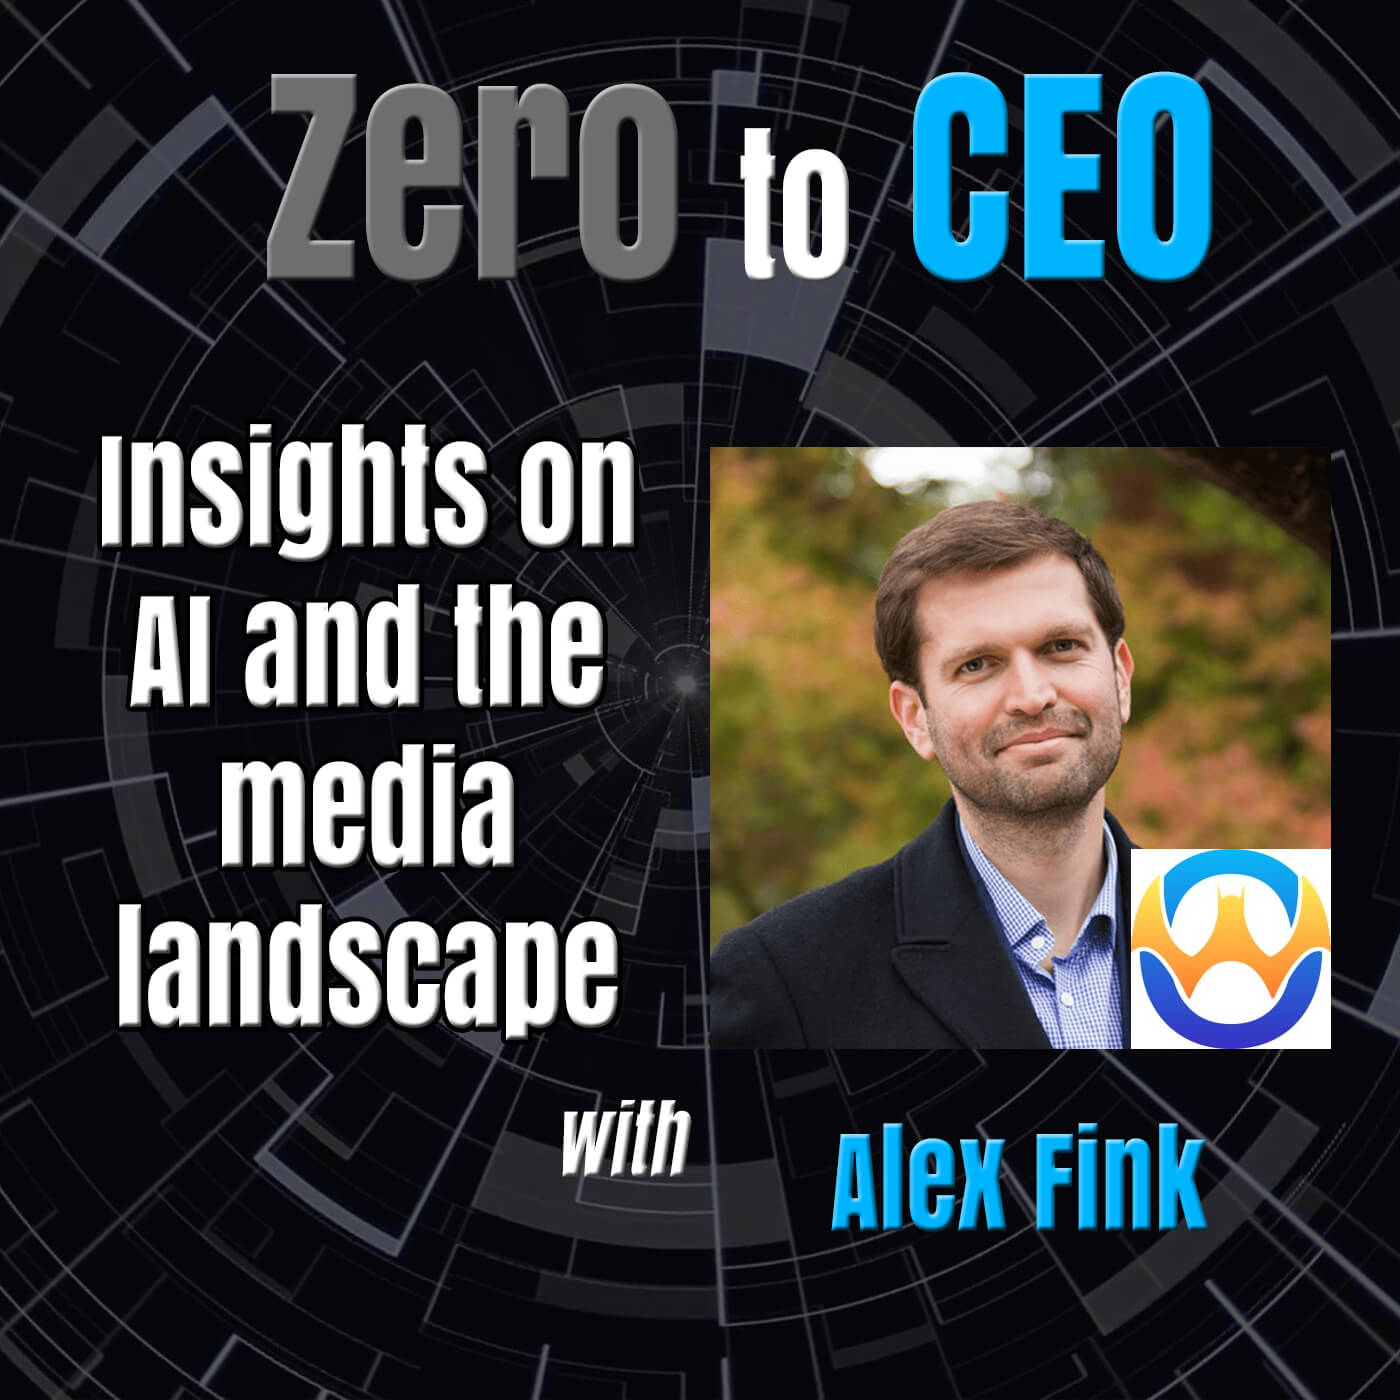 Zero to CEO: Insights on AI and the media landscape with Alex Fink